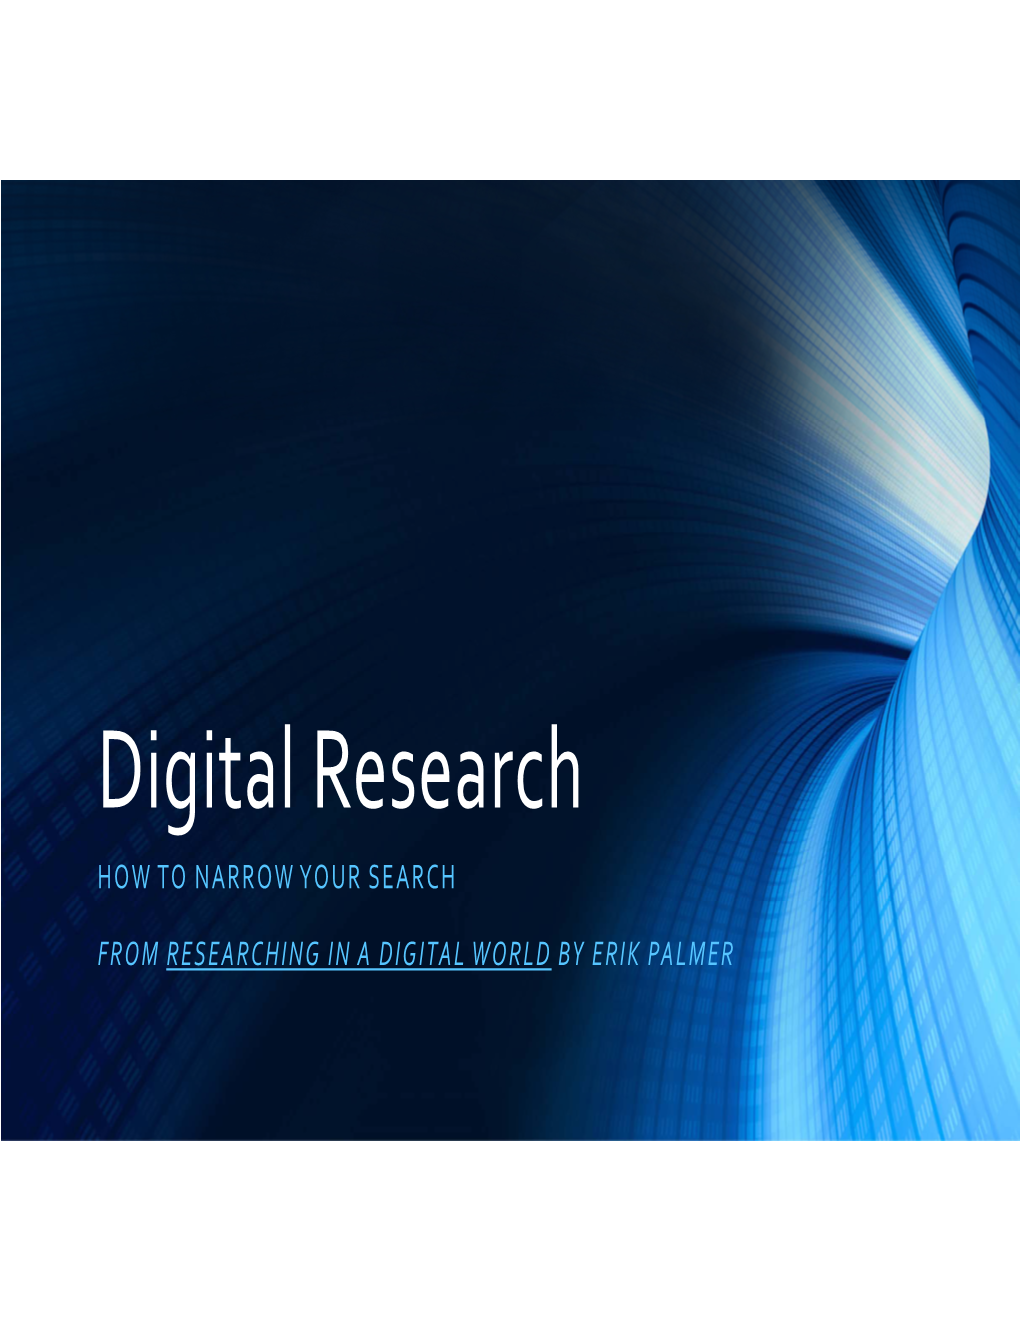 Digital Research HOW to NARROW YOUR SEARCH